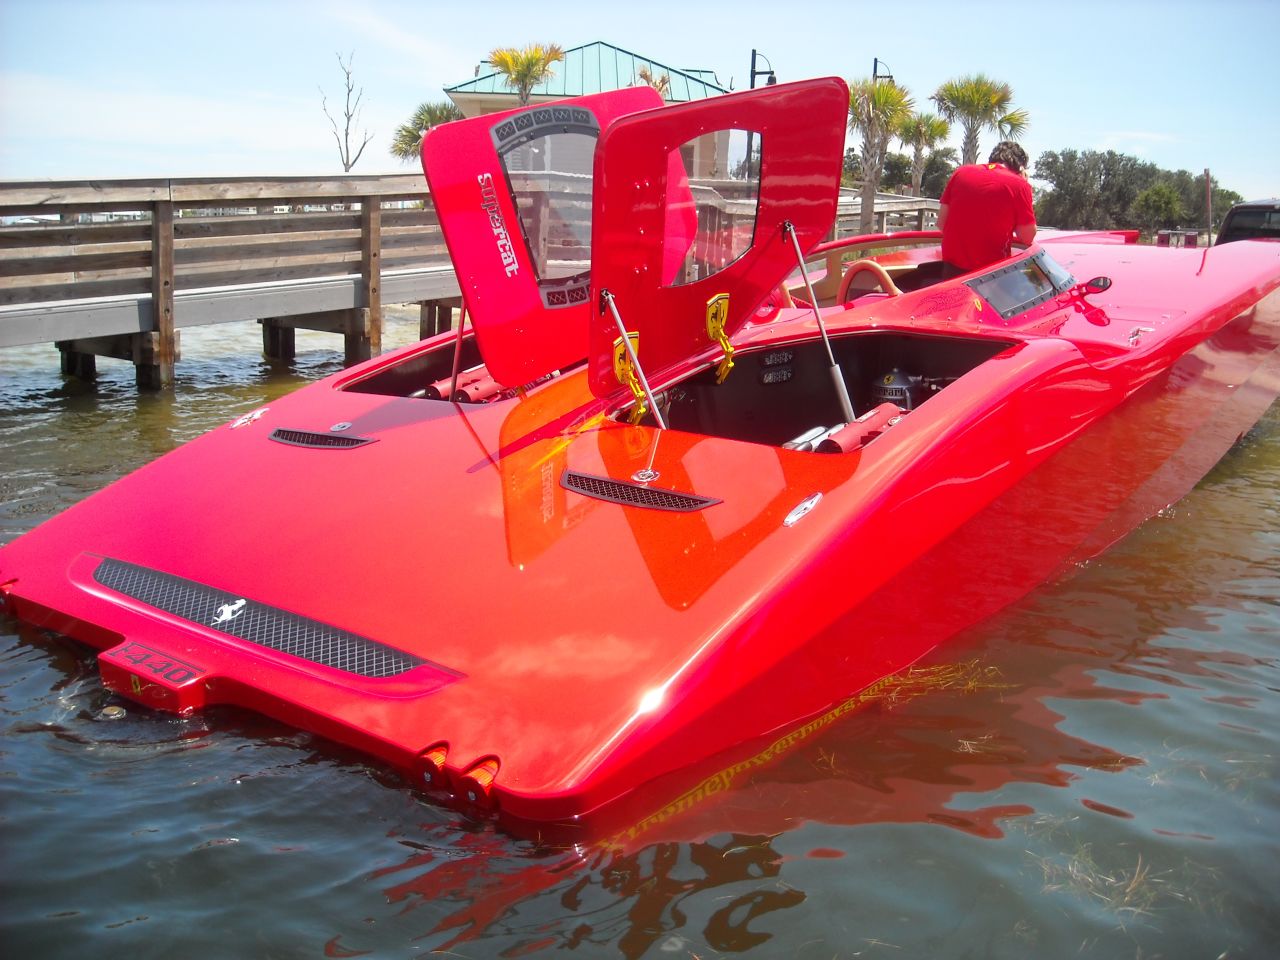 The company also made this Ferrari-inspired yacht and a Corvette-style boat for other wealthy clients. "The people that own these boats, already own the vehicles," says Larry Goldman, owner of<a href="http://www.xtremepowerboats.com/" target="_blank" target="_blank"> Xtremepowerboats</a>, which deals the pimped-up yachts. "Nobody wants a boat to resemble a car that they can't afford."